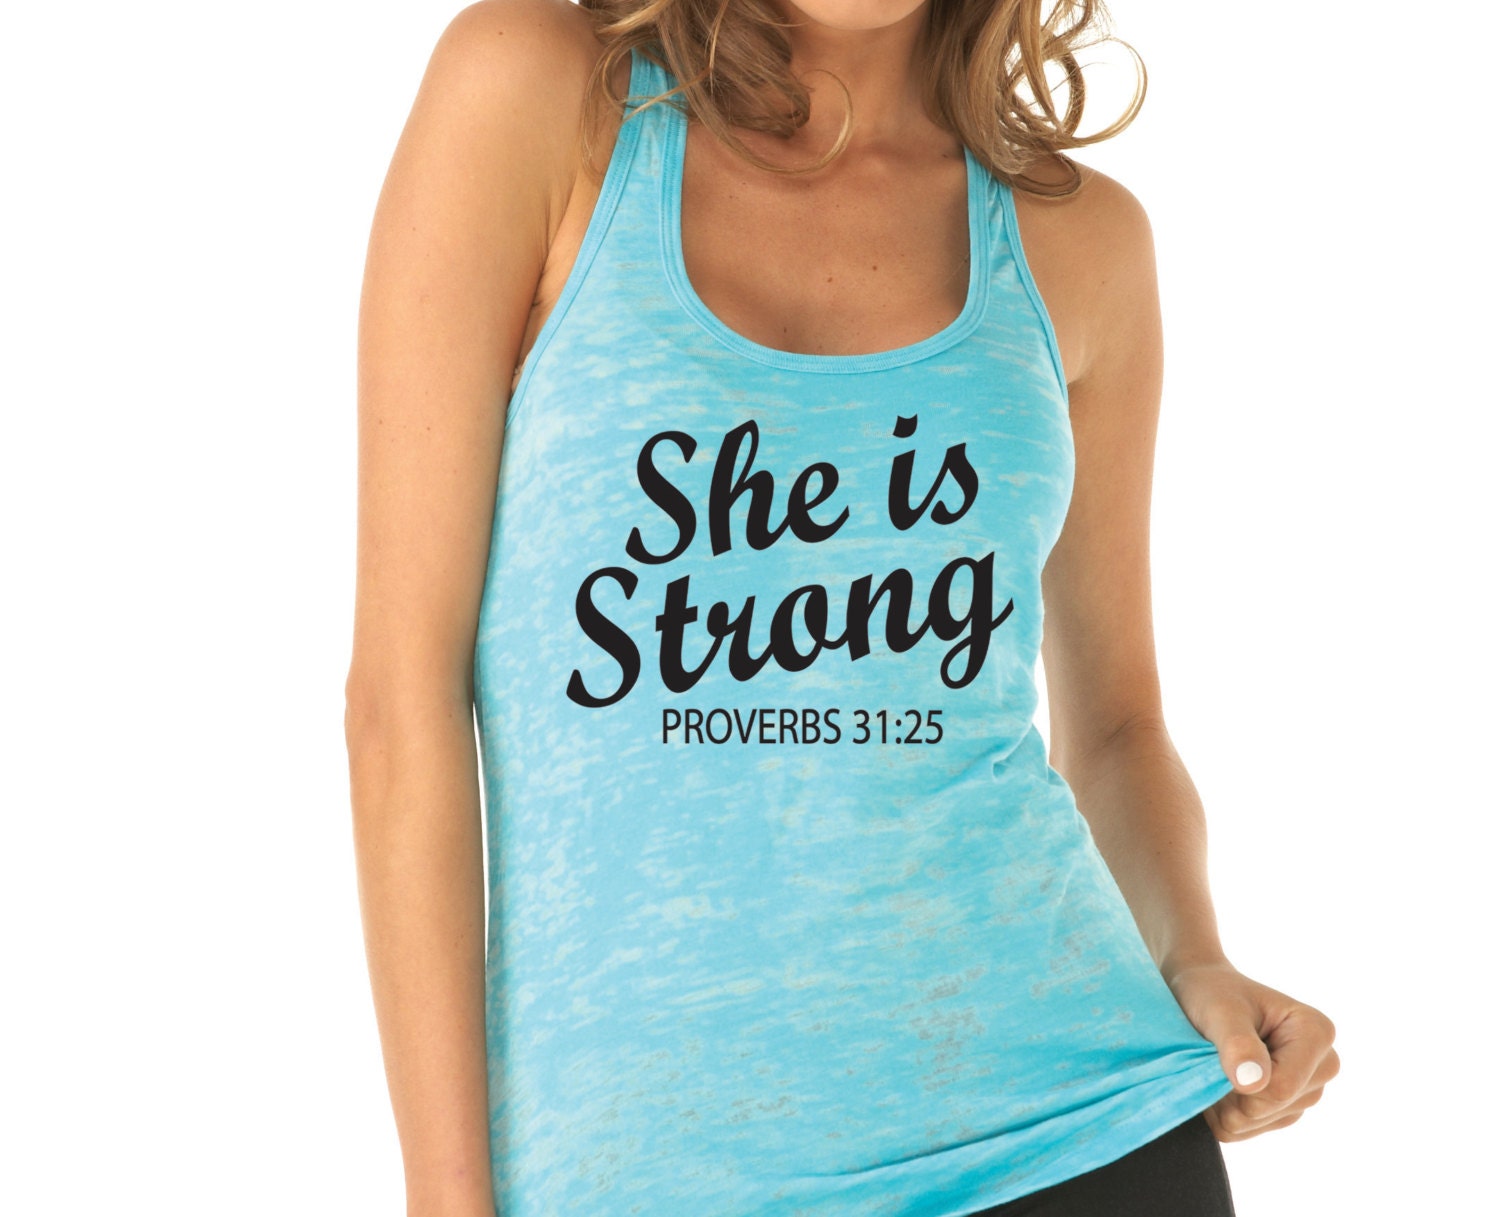 She Is Strong Proverbs 31:25. Workout Tank. by WorkItWear on Etsy